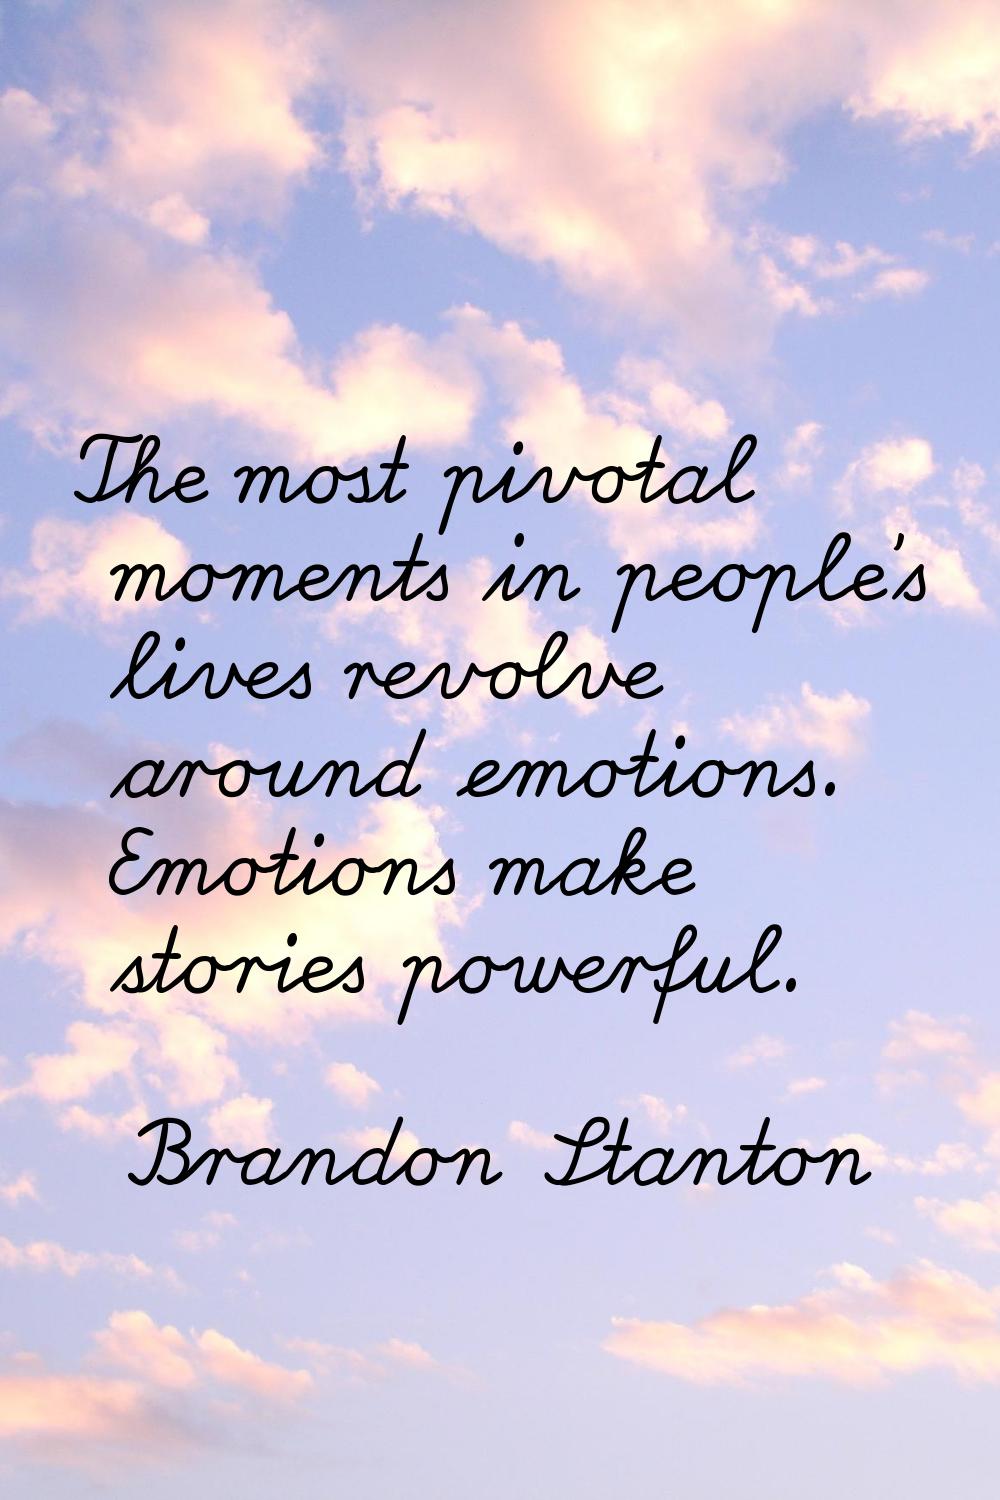 The most pivotal moments in people's lives revolve around emotions. Emotions make stories powerful.